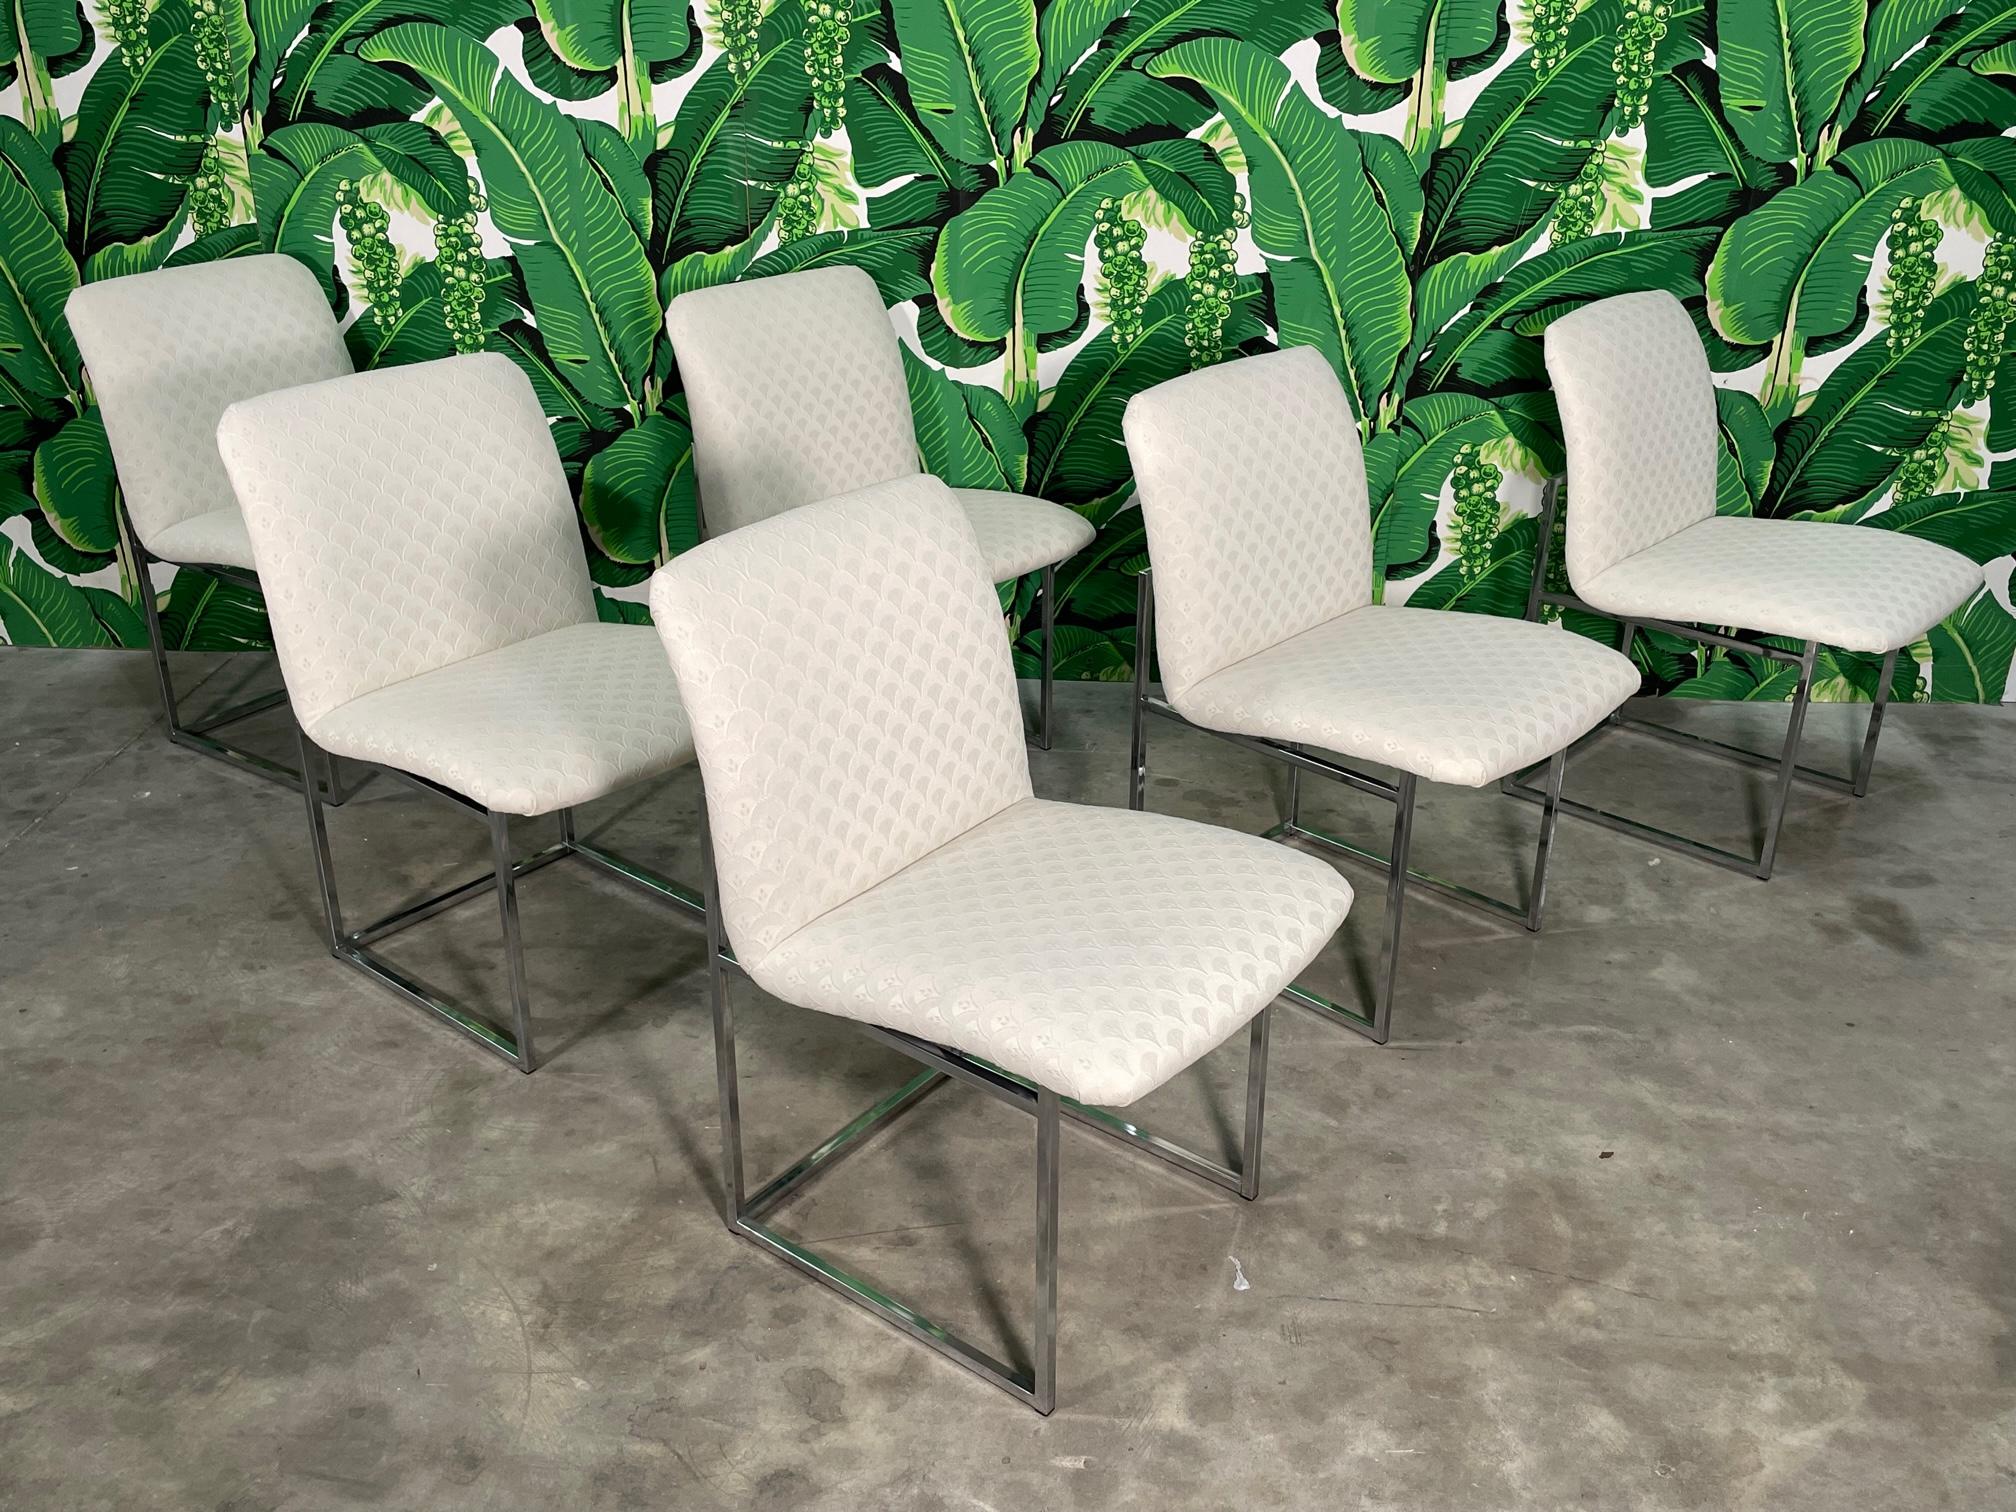 Set of six mid century modern chrome dining chairs by Design Institute of America. Features the iconic thin line frame and simple, modern styling. Good condition with minor imperfections consistent with age, see photos for condition details. 
For a